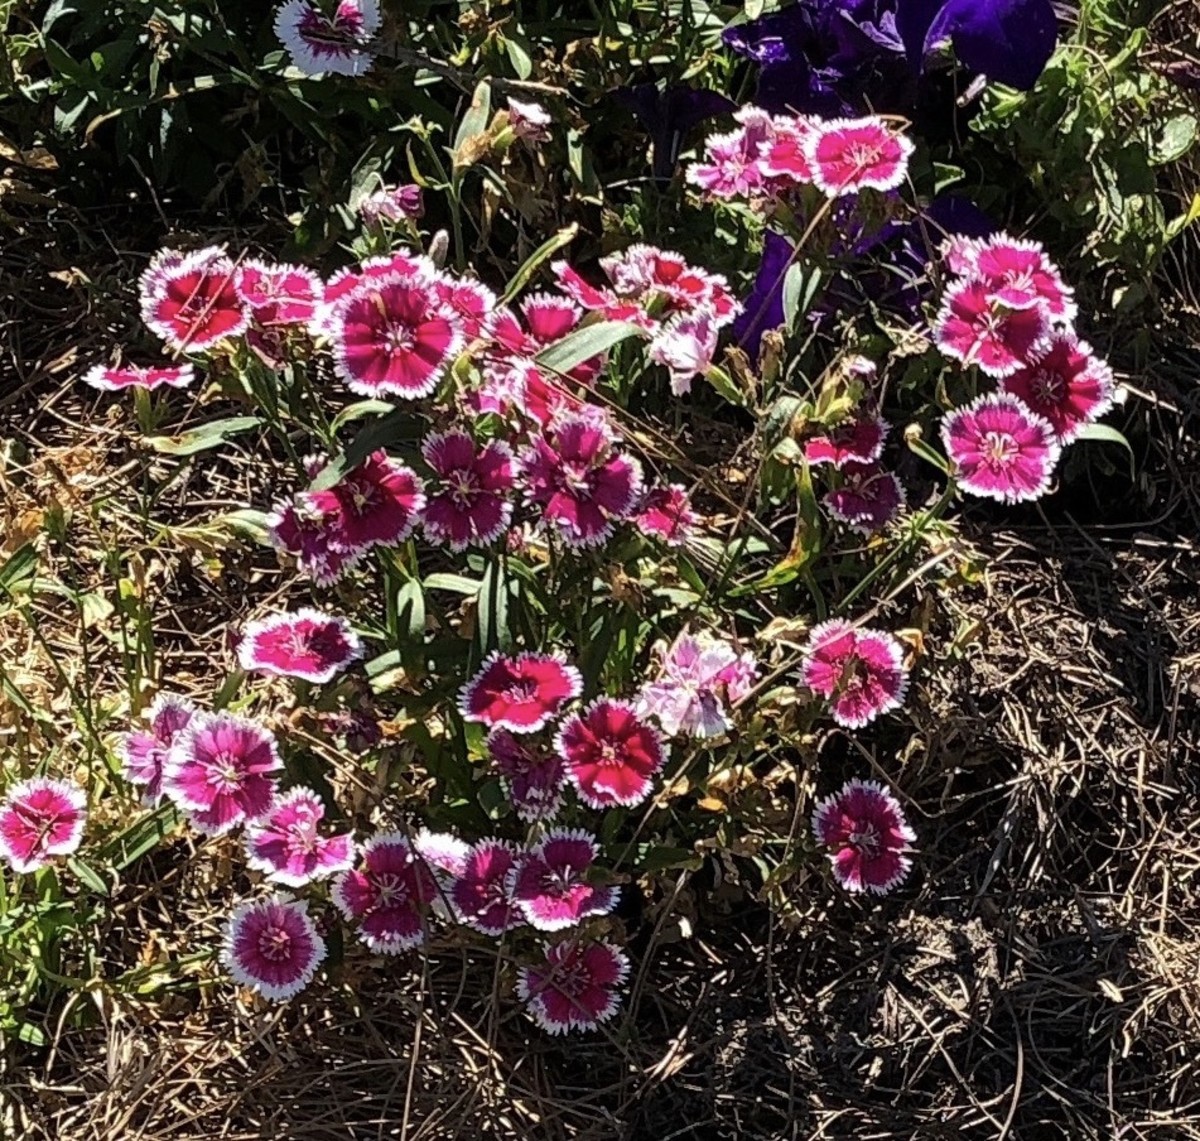 These are some dianthus I had in my Florida garden. They lasted all through fall, winter, and spring. They finally succumbed to the intense heat of summer.